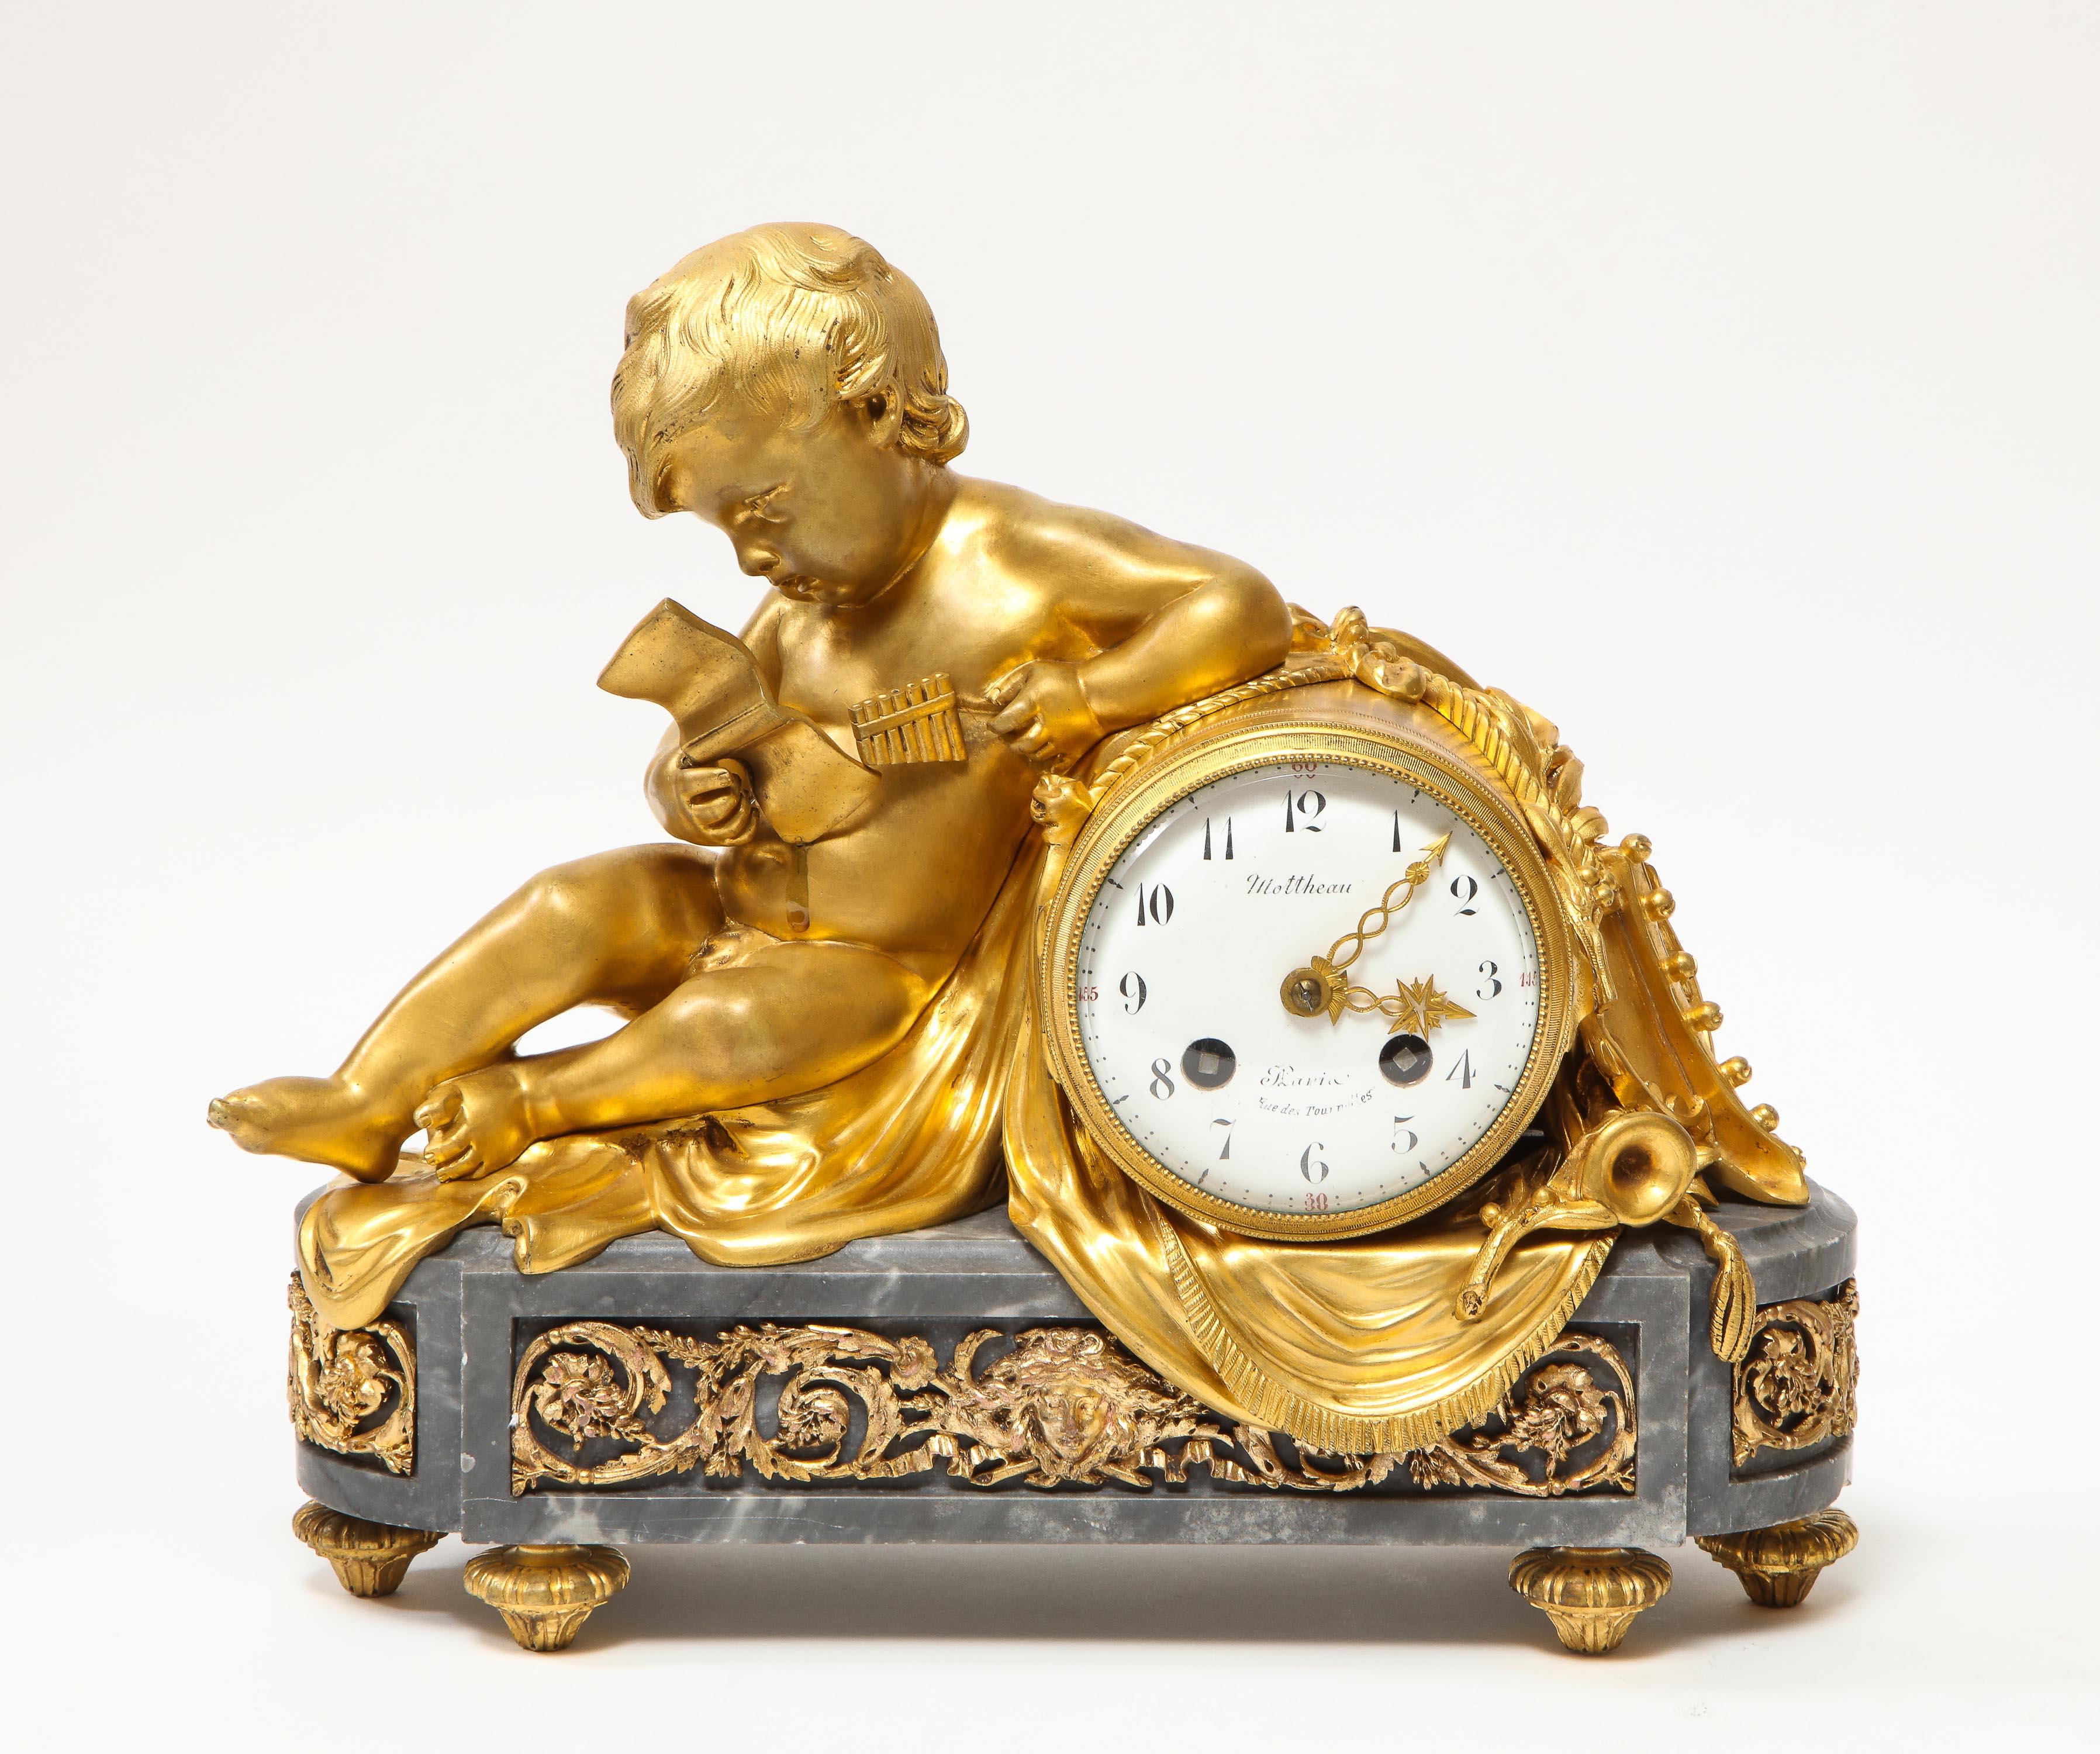 A French ormolu-mounted Bleu Turquin marble figural clock by Maison Mottheau Paris, circa 1880.

A very nice clock, with very good quality mounts, depicting a seated putti with musical instrument, on a bleu turquin marble base with bronze scrolls